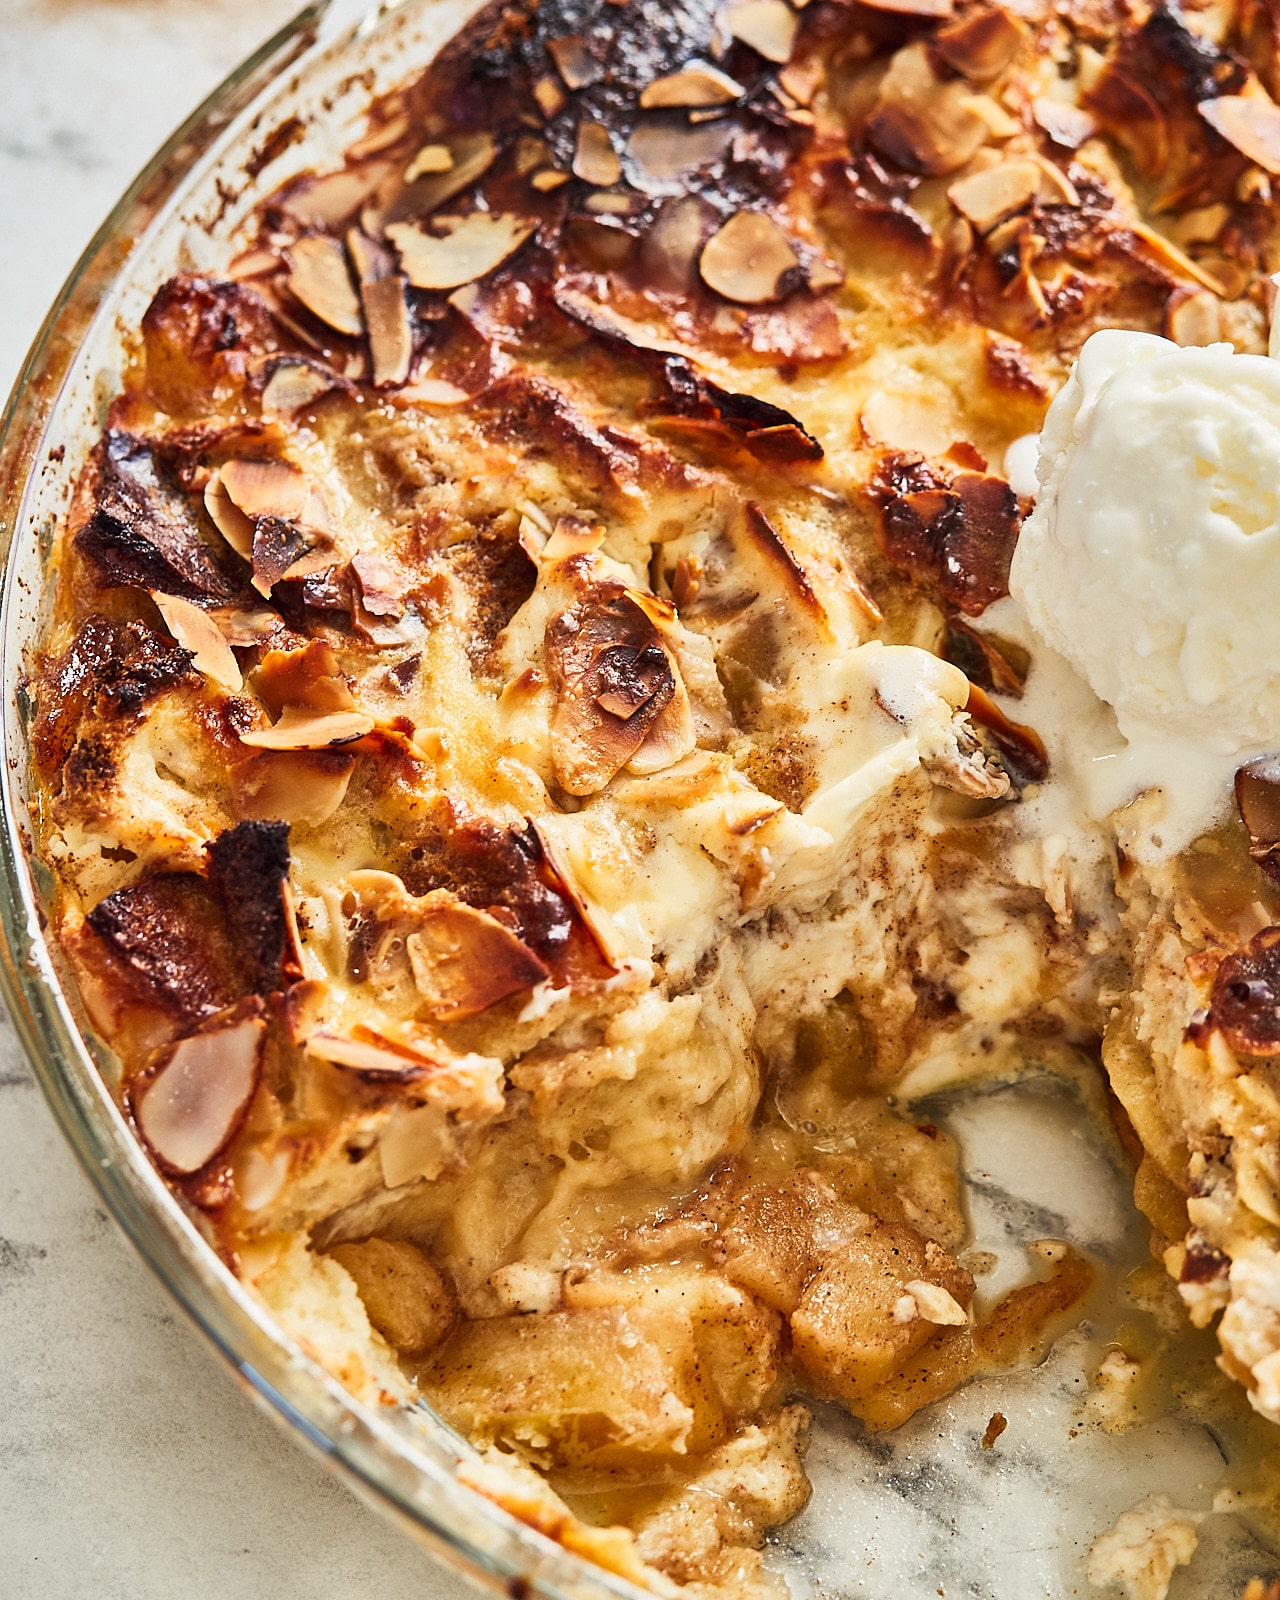 Cinnamon Apple Casserole is nothing more delightful than a dish full of aromas and Christmas feelings.